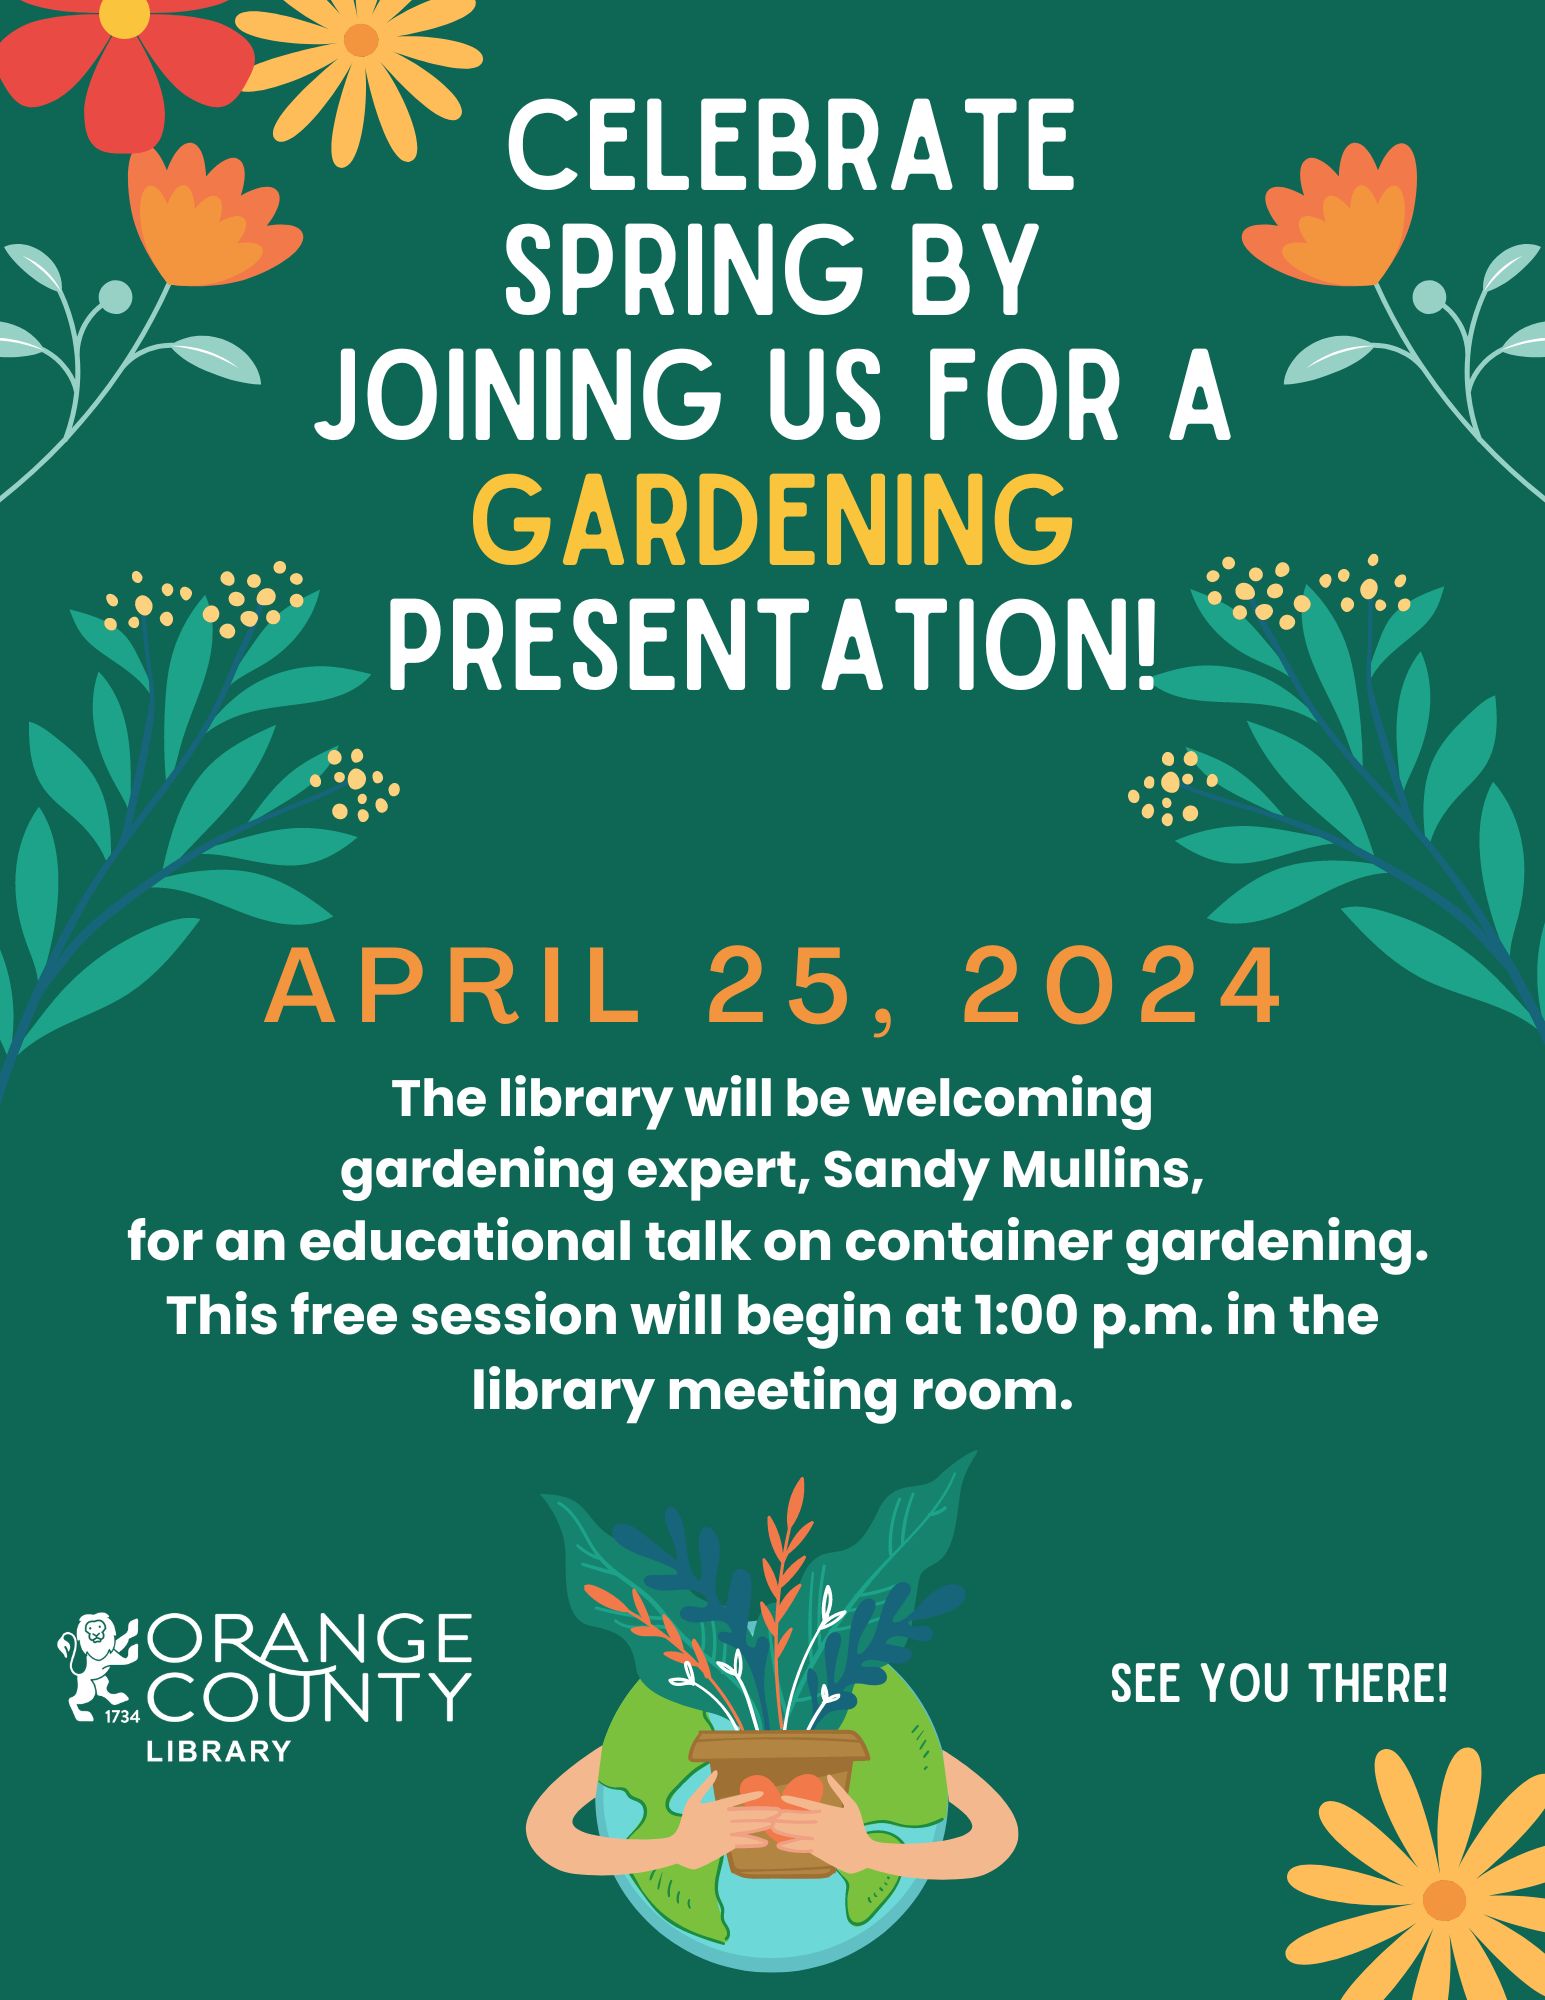 Gardening Speaker at the Wilderness Branch Library on April 25, 2024 at 1 pm